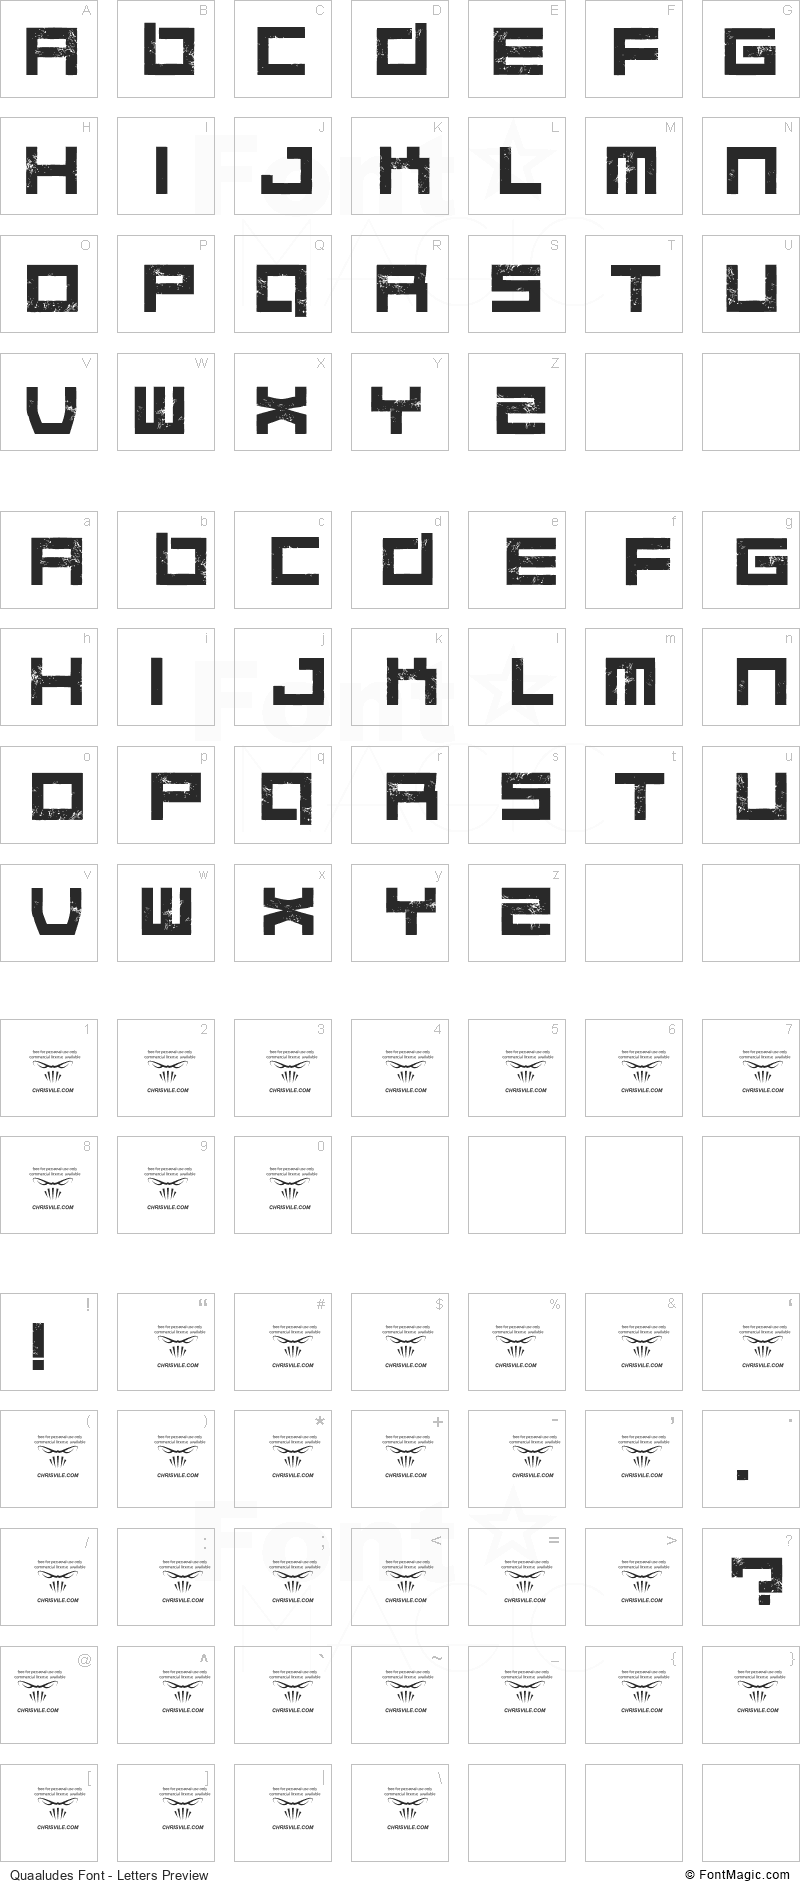 Quaaludes Font - All Latters Preview Chart